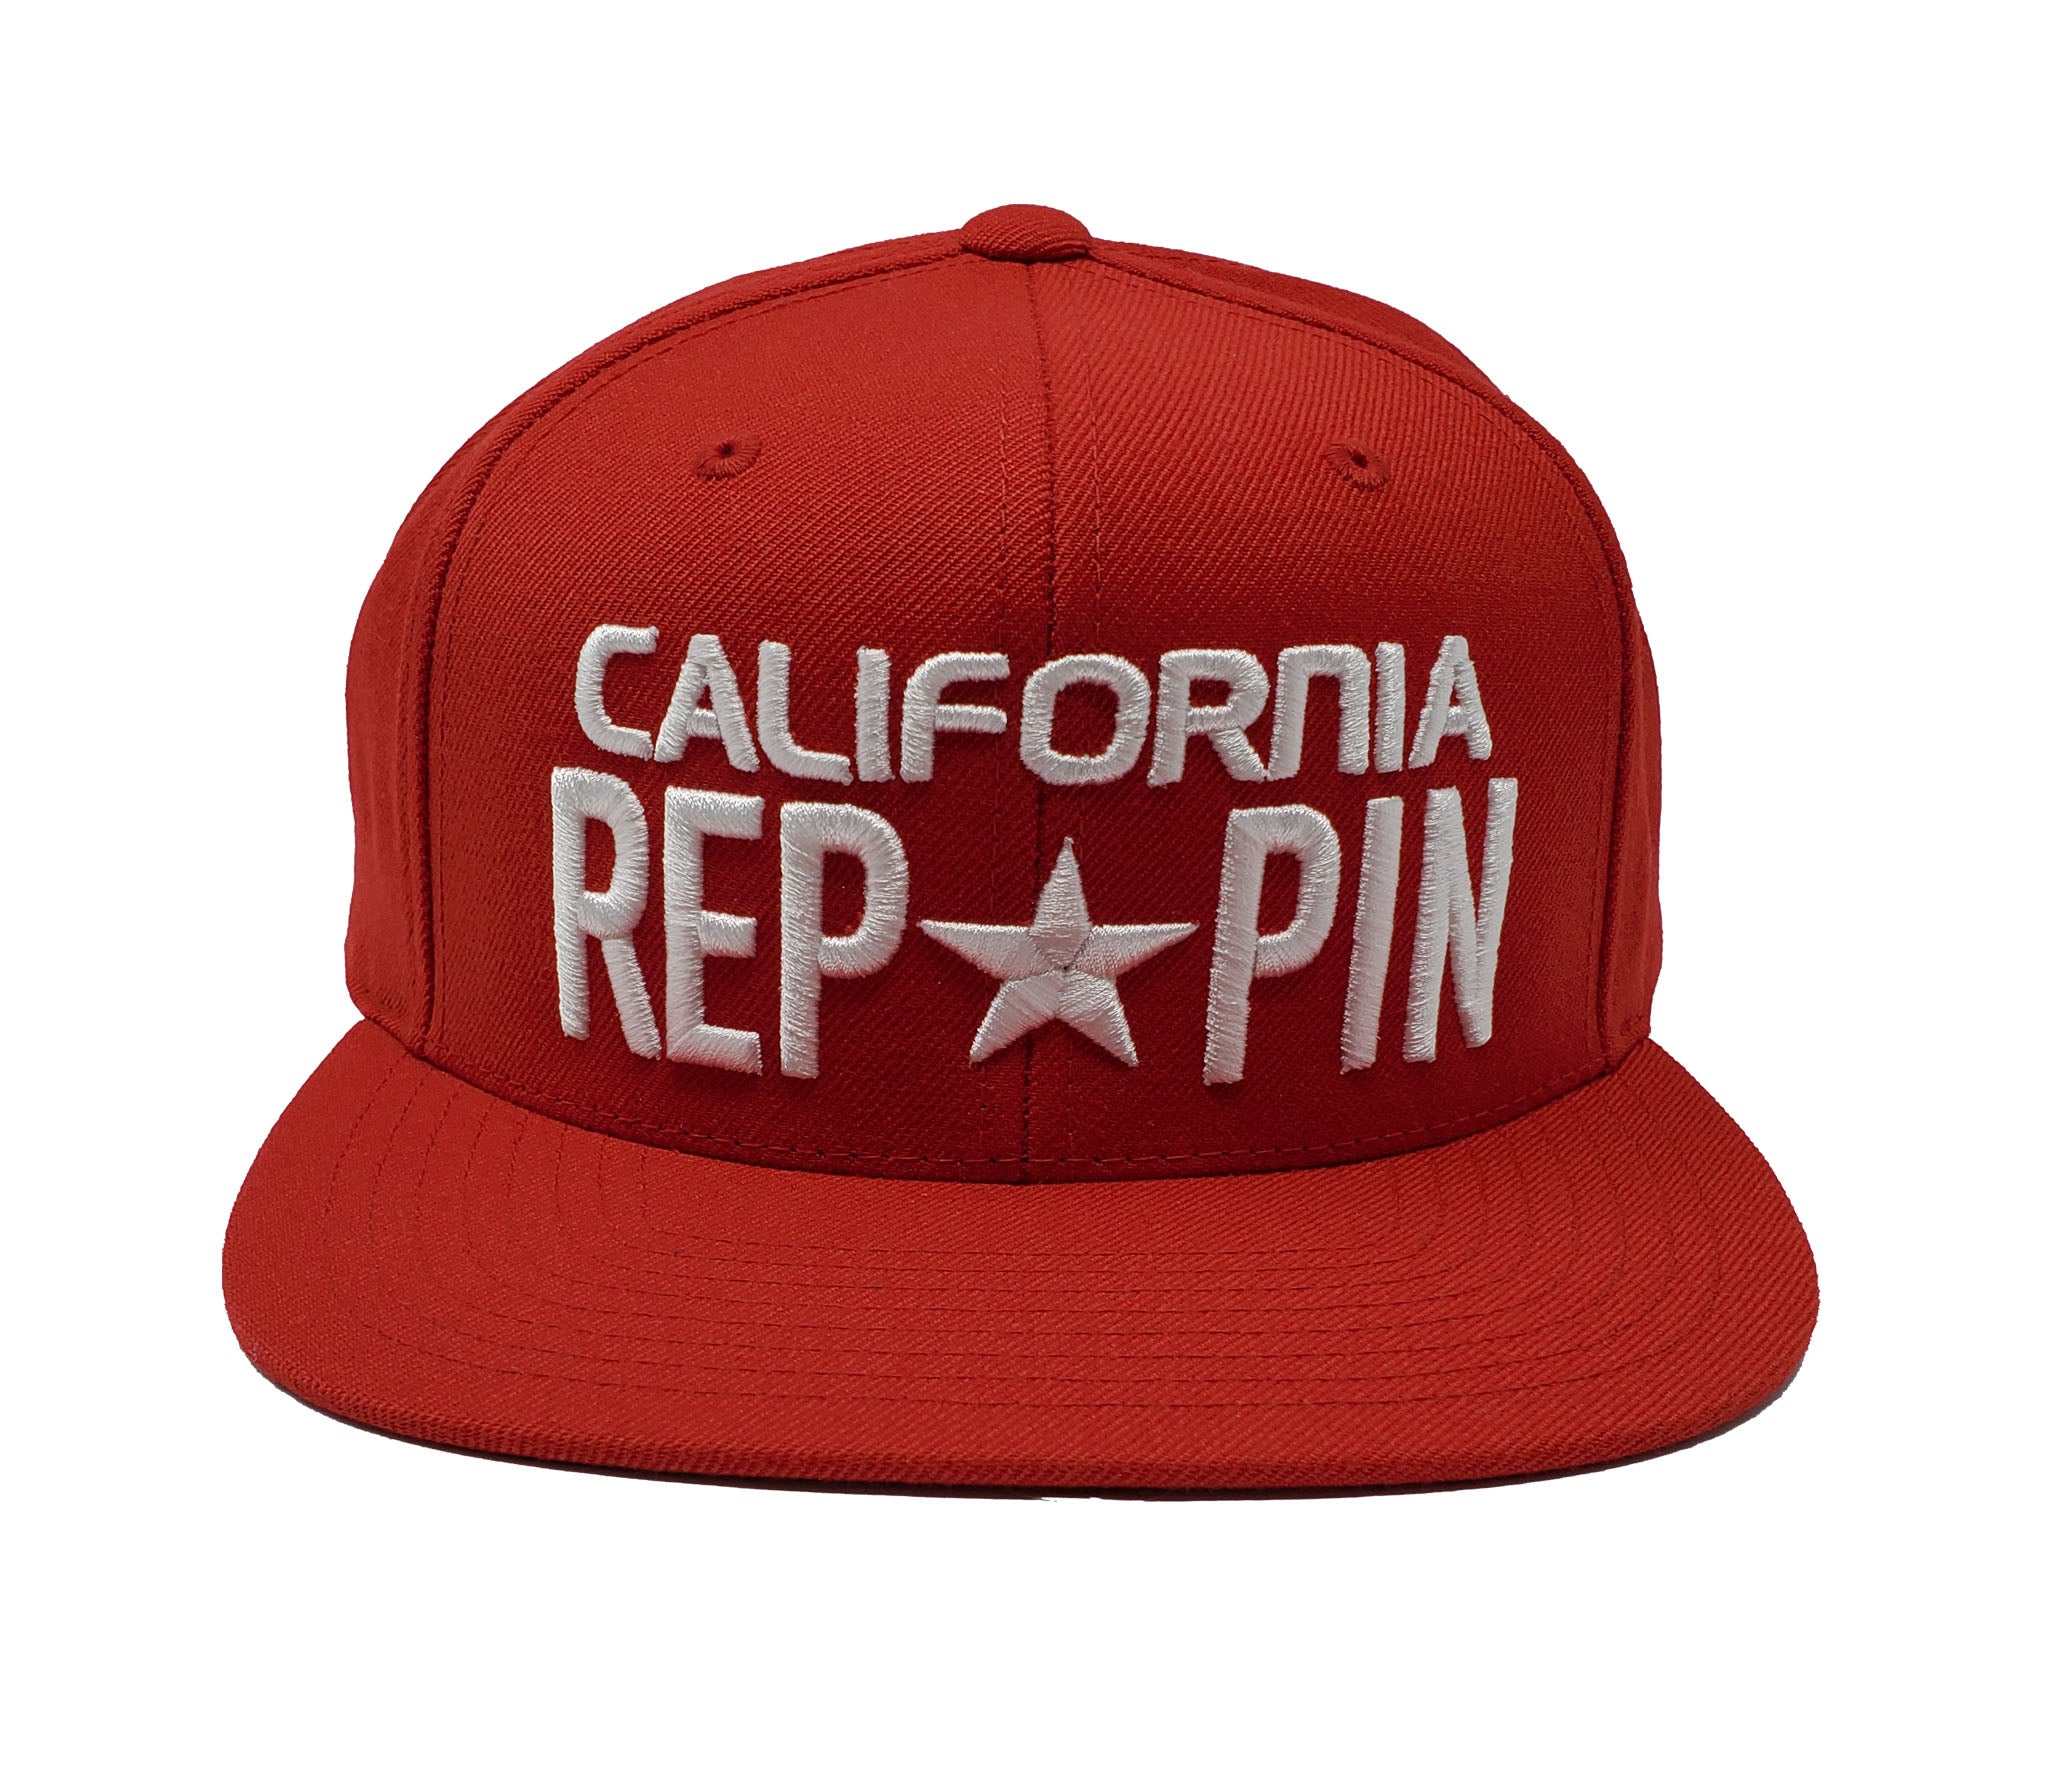 California Reppin Red and White Snapback